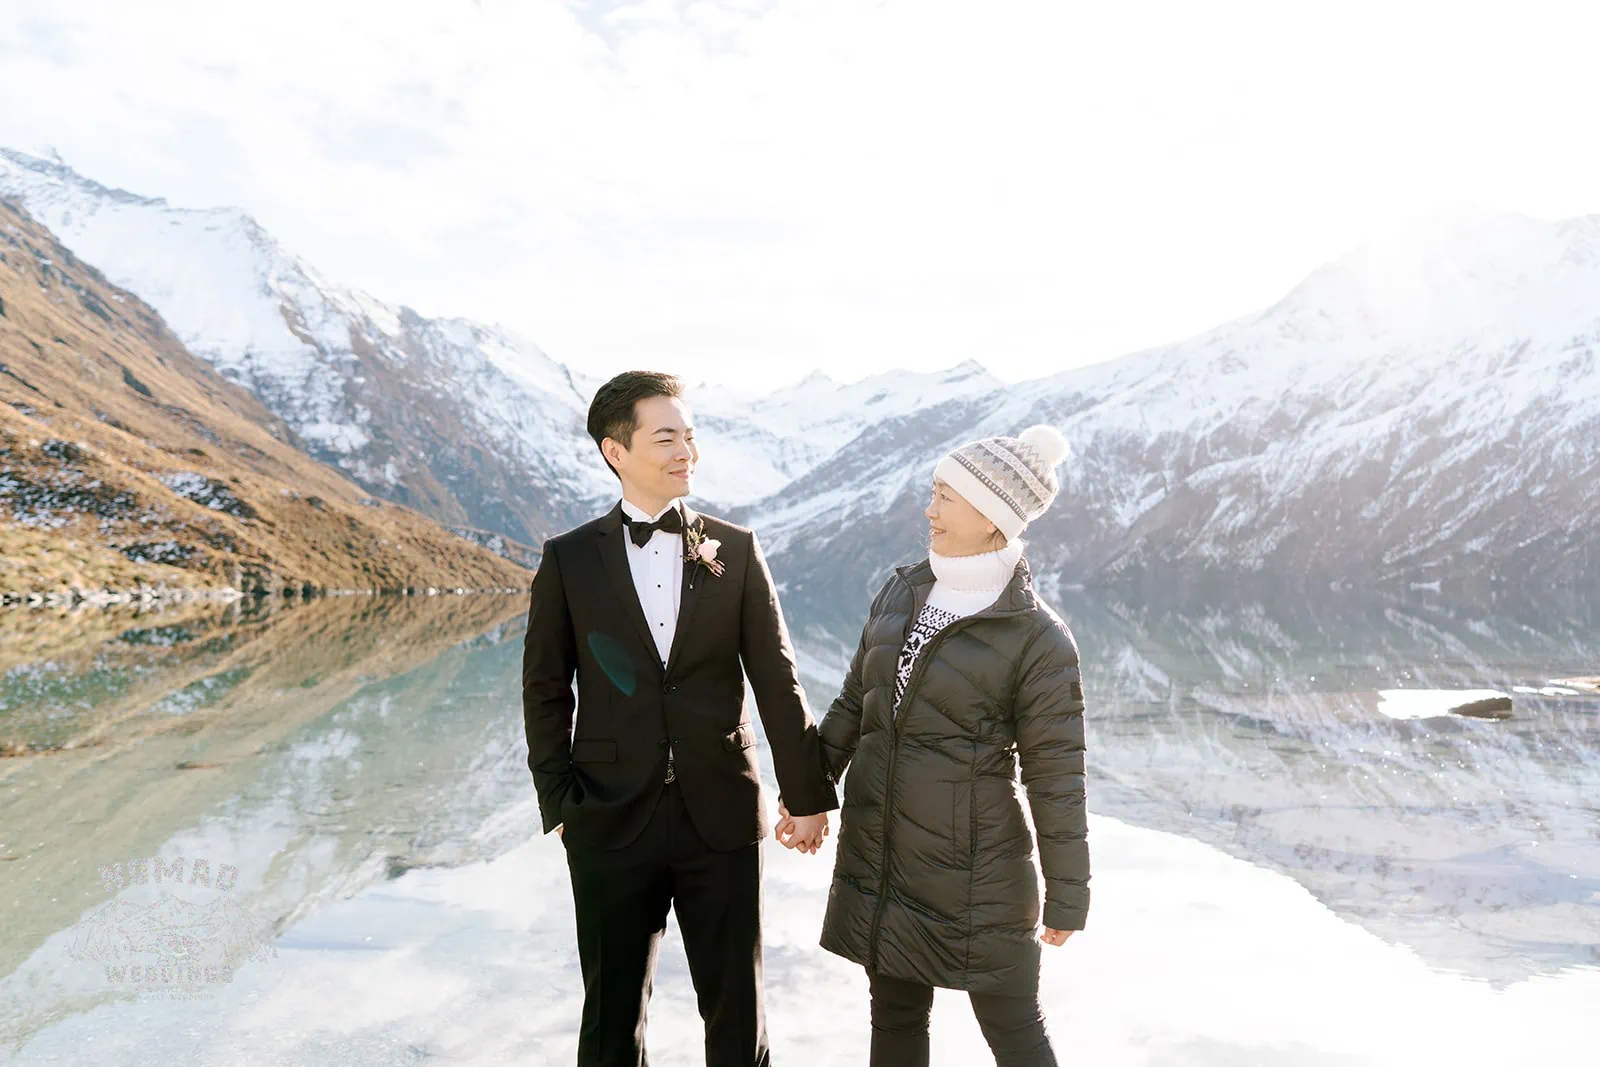 Queenstown New Zealand Elopement Wedding Photographer - Bo and Junyi's heli pre wedding shoot with 4 landings captures a couple holding hands in front of a lake in New Zealand.